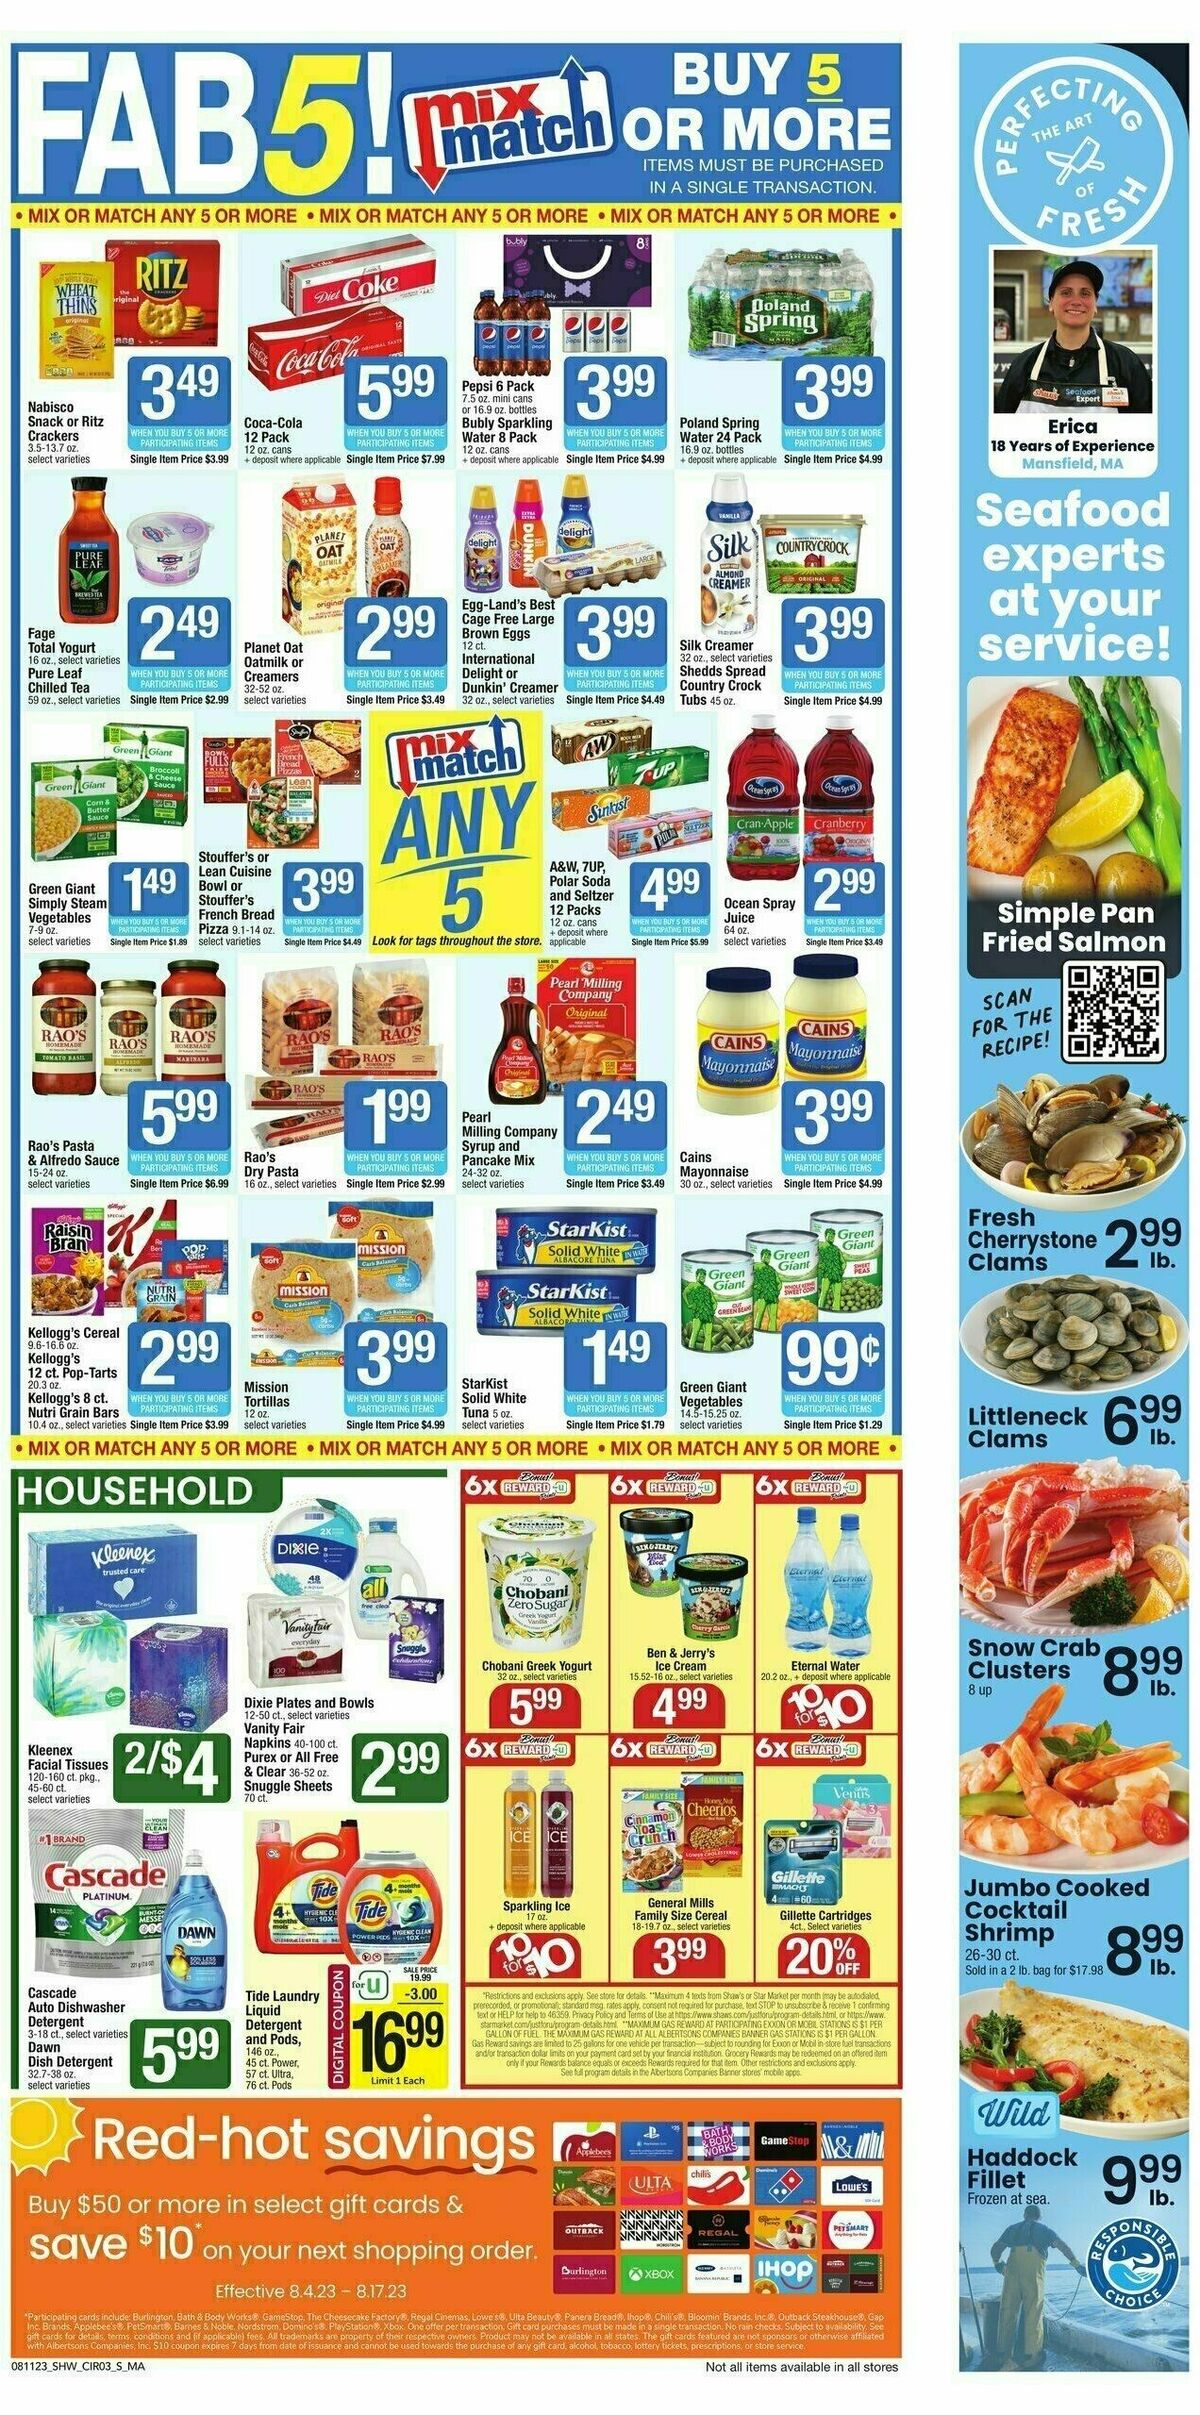 Shaw's Weekly Ad from August 11